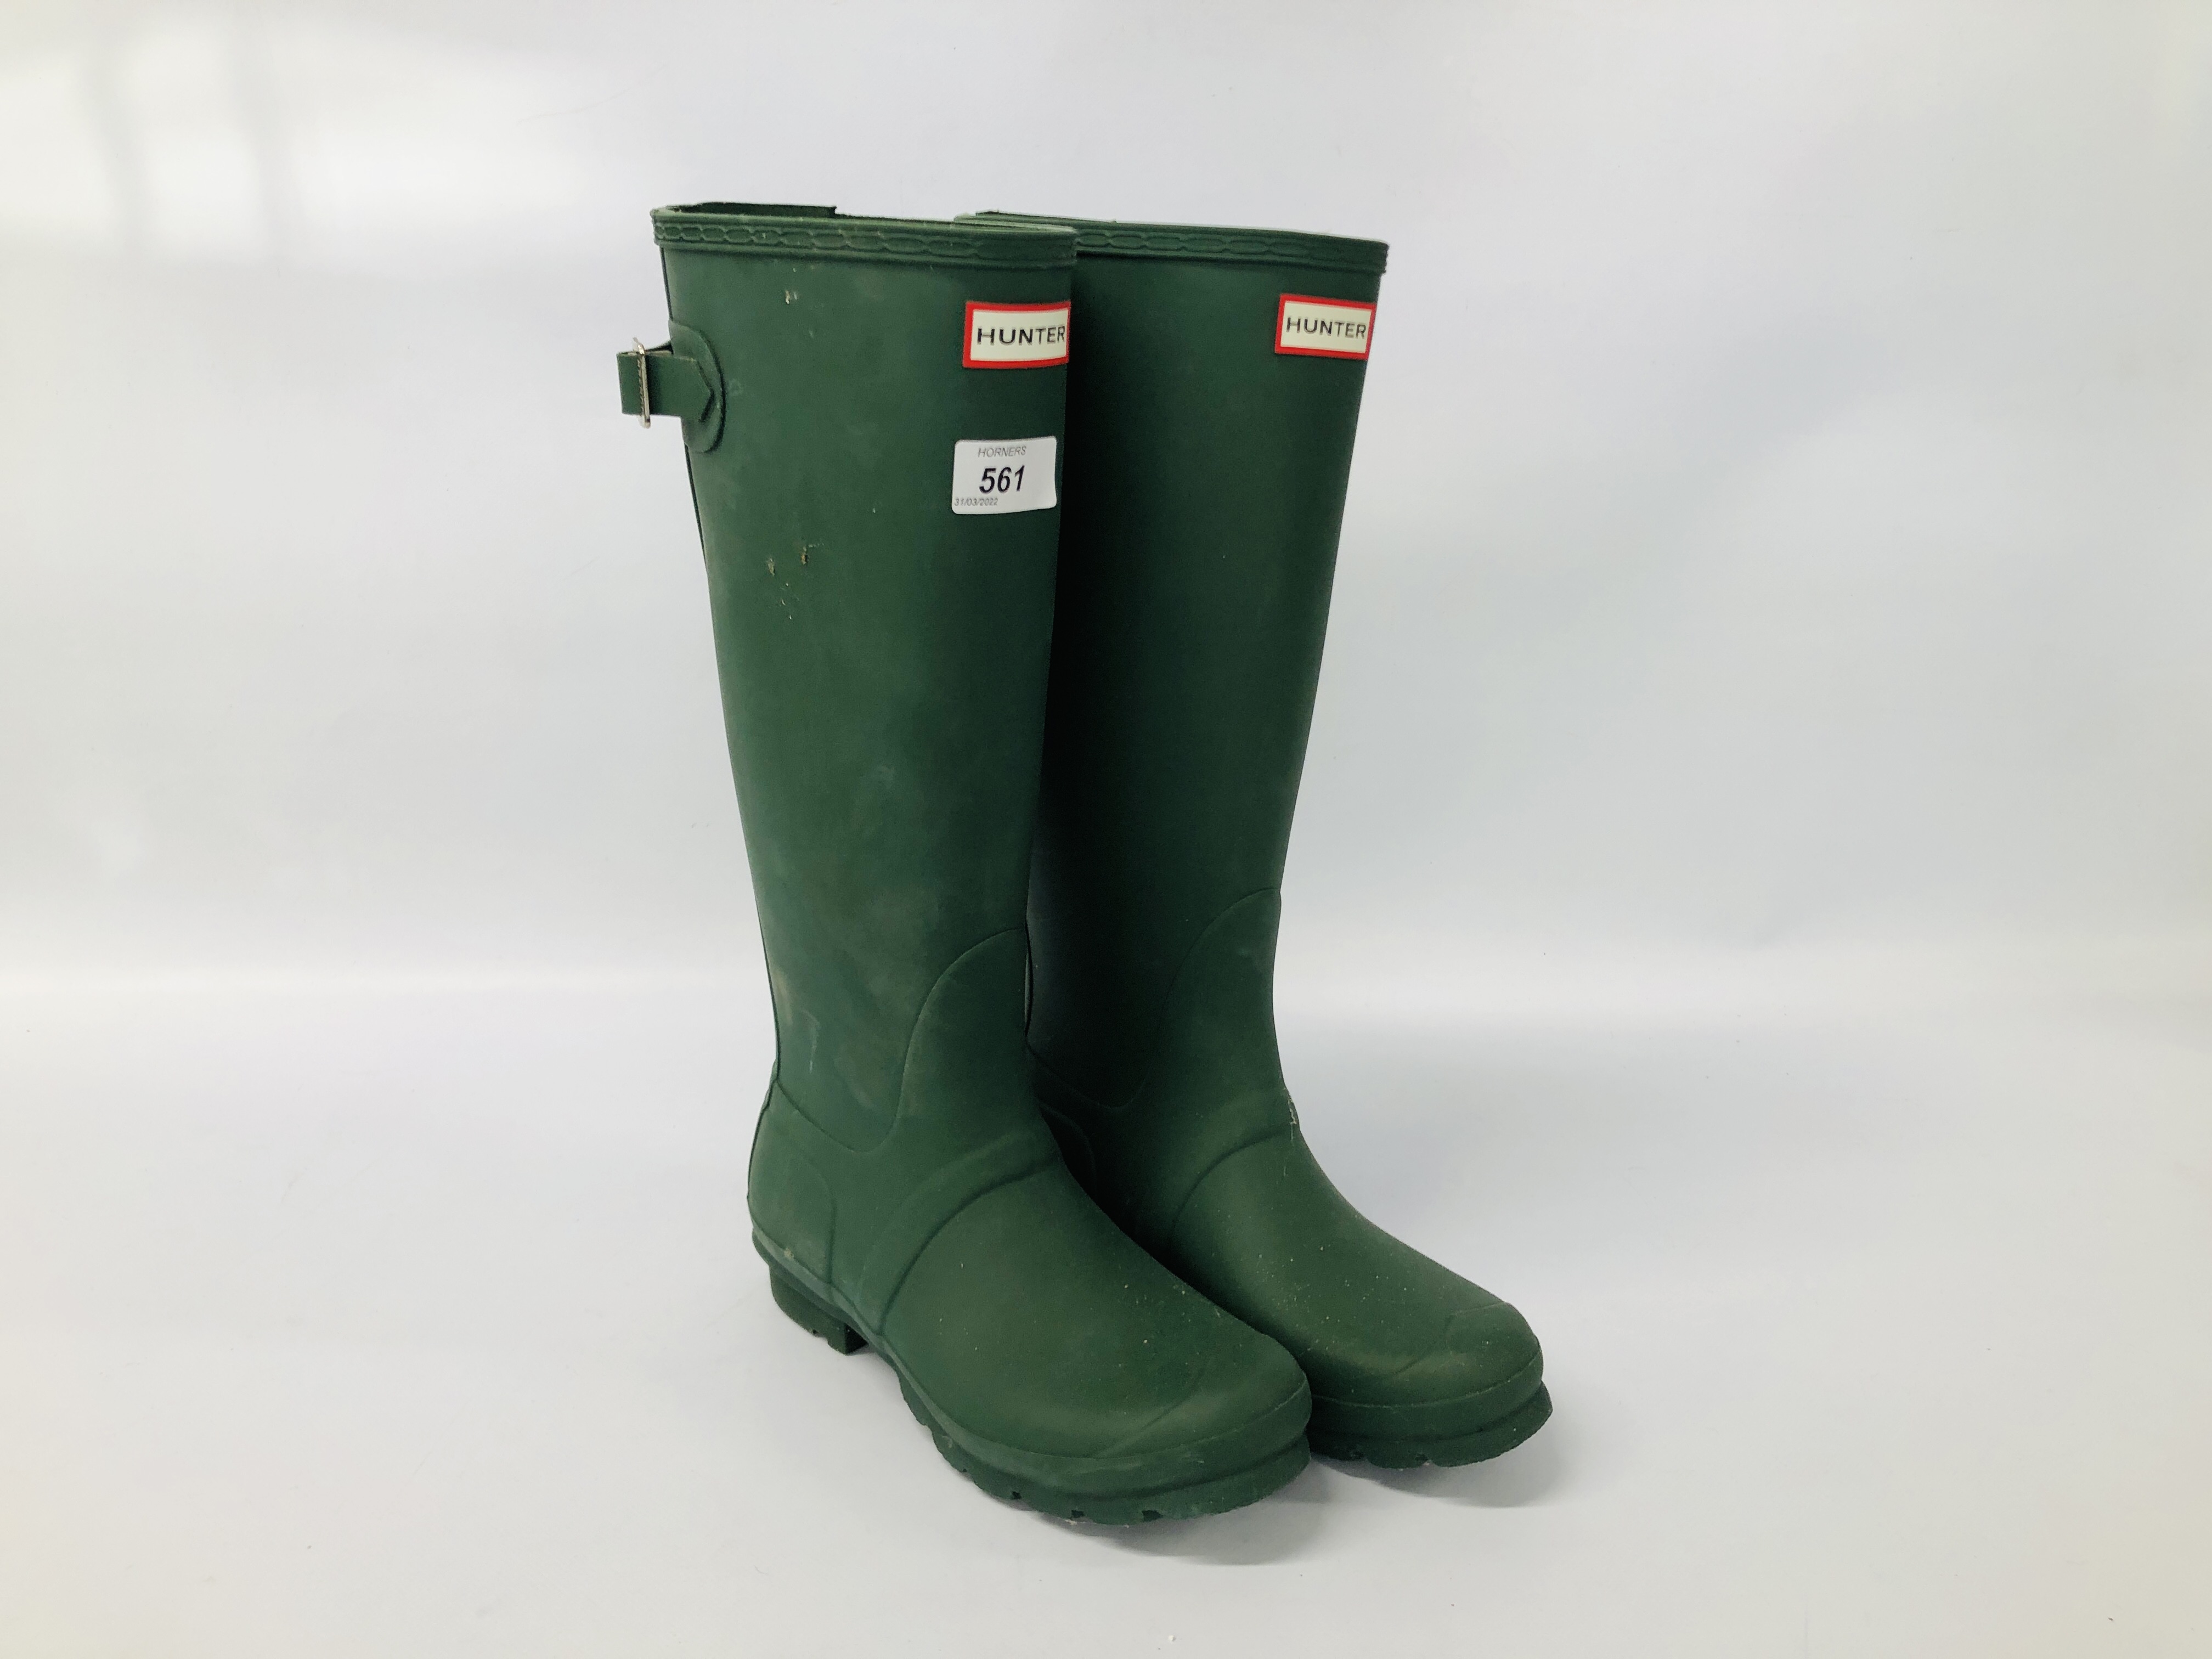 A PAIR OF AS NEW HUNTER WELLINGTON BOOTS SIZE 5.